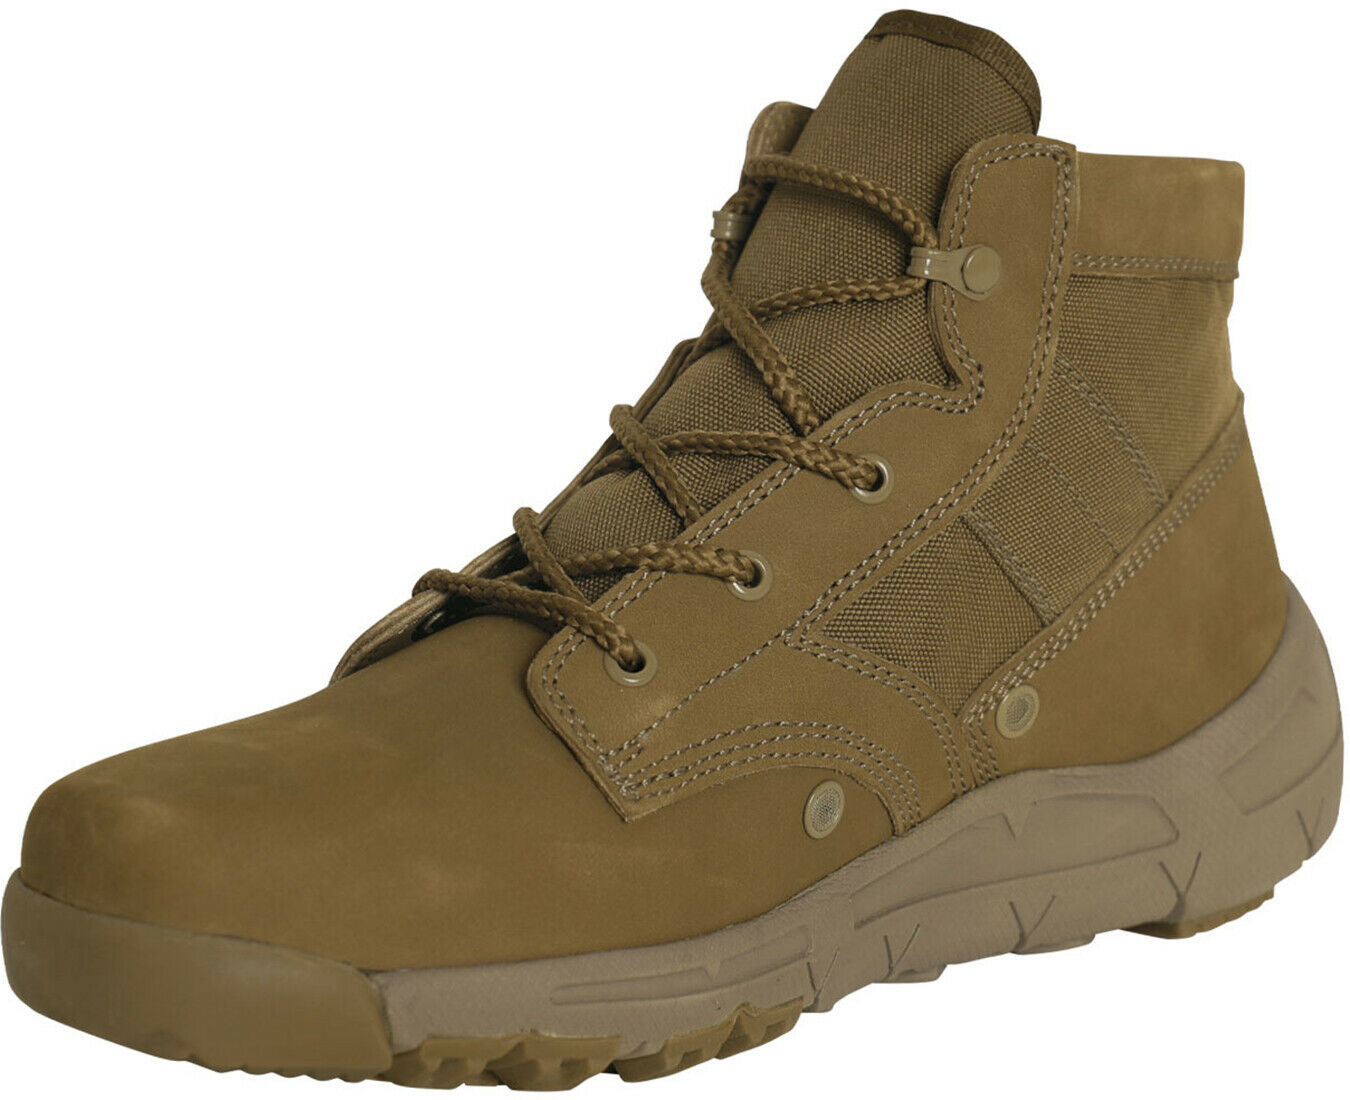 Coyote Brown AR 670-1 US Army Compliant Low Tactical Boots 6